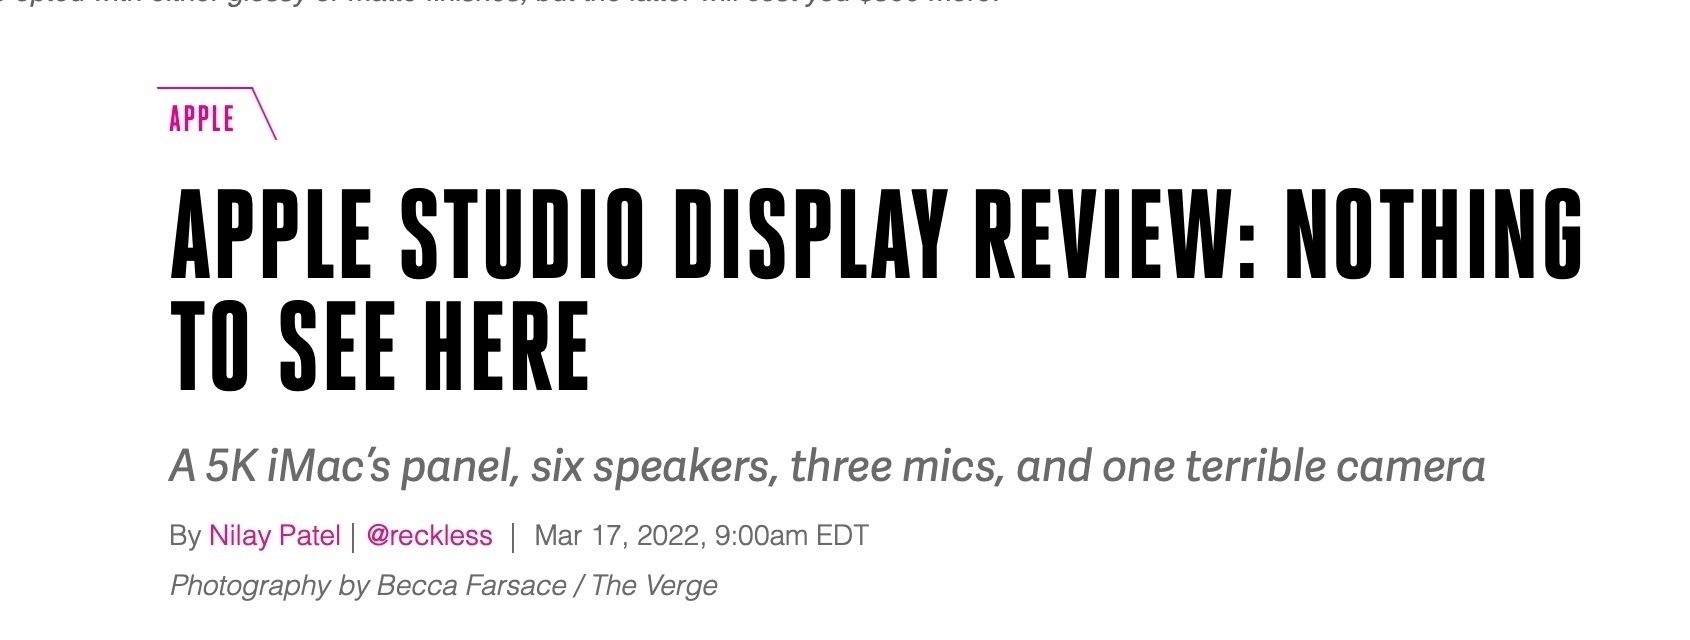 APPLE STUDIO DISPLAY REVIEW: NOTHING TO SEE HERE&10;A 5K iMac’s panel, six speakers, three mics, and one terrible camera